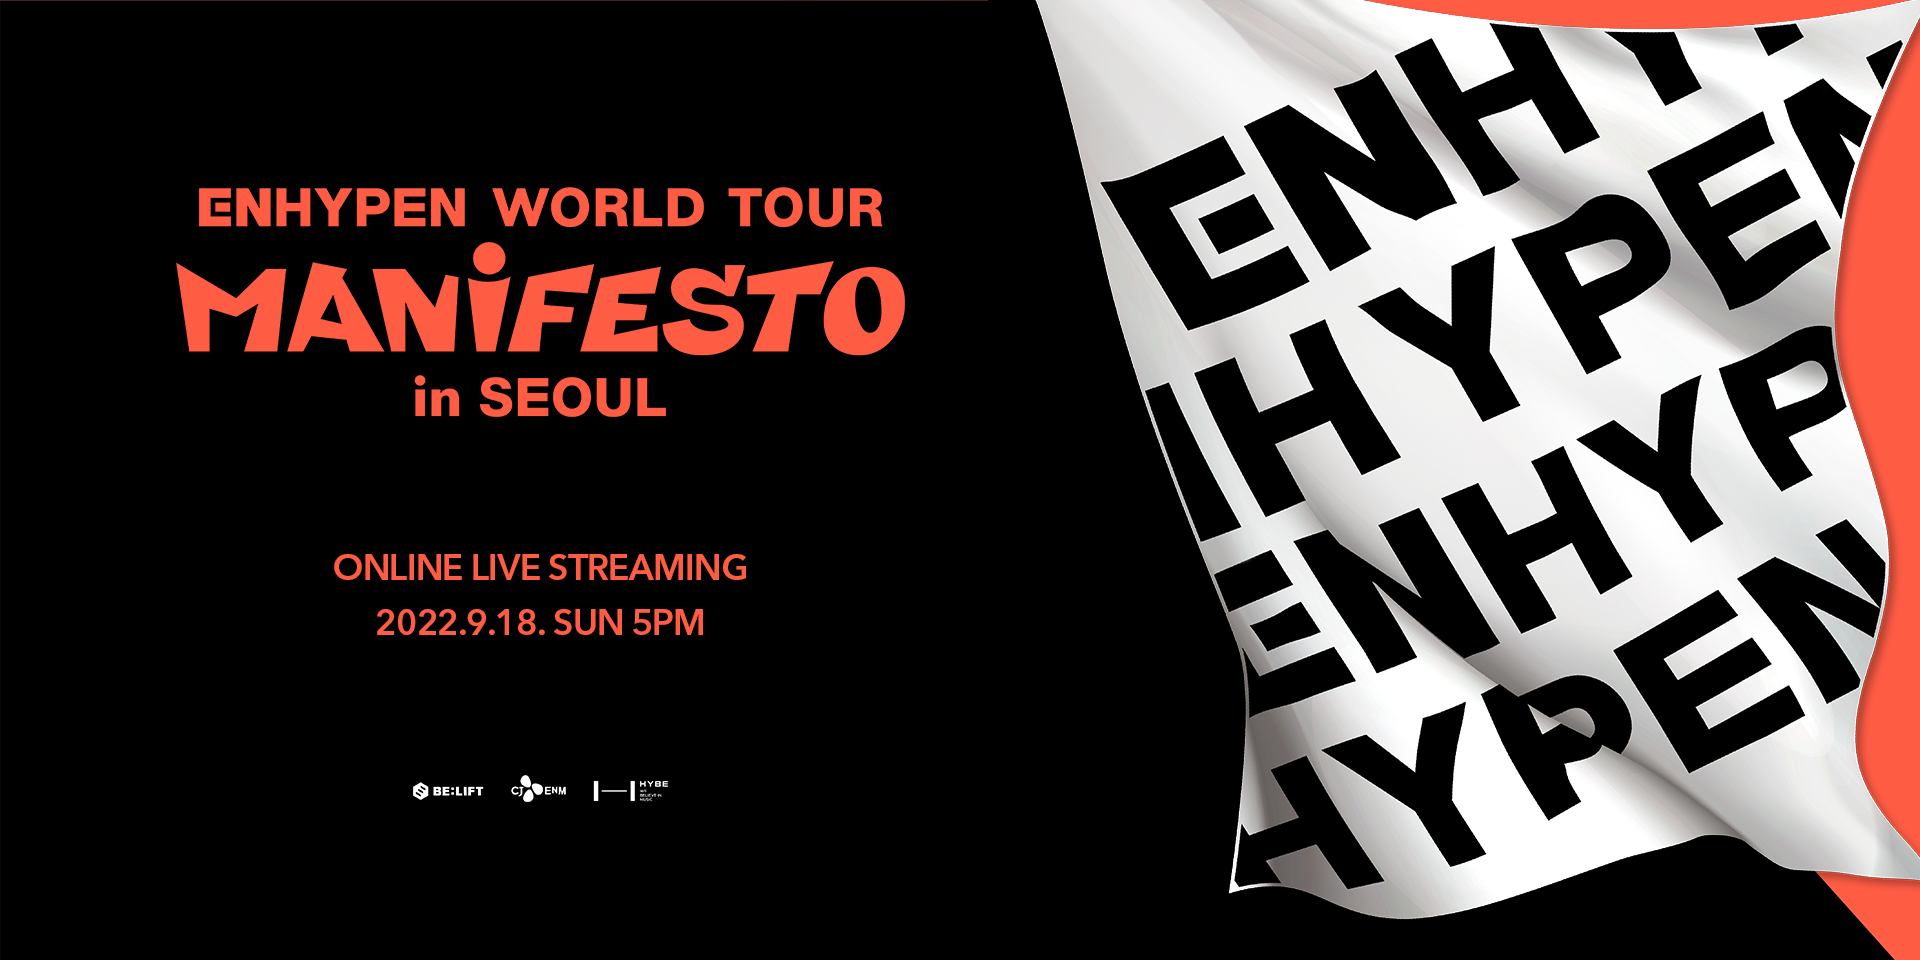 Weverse Concerts | ENHYPEN WORLD TOUR 'MANIFESTO' in SEOUL ONLINE